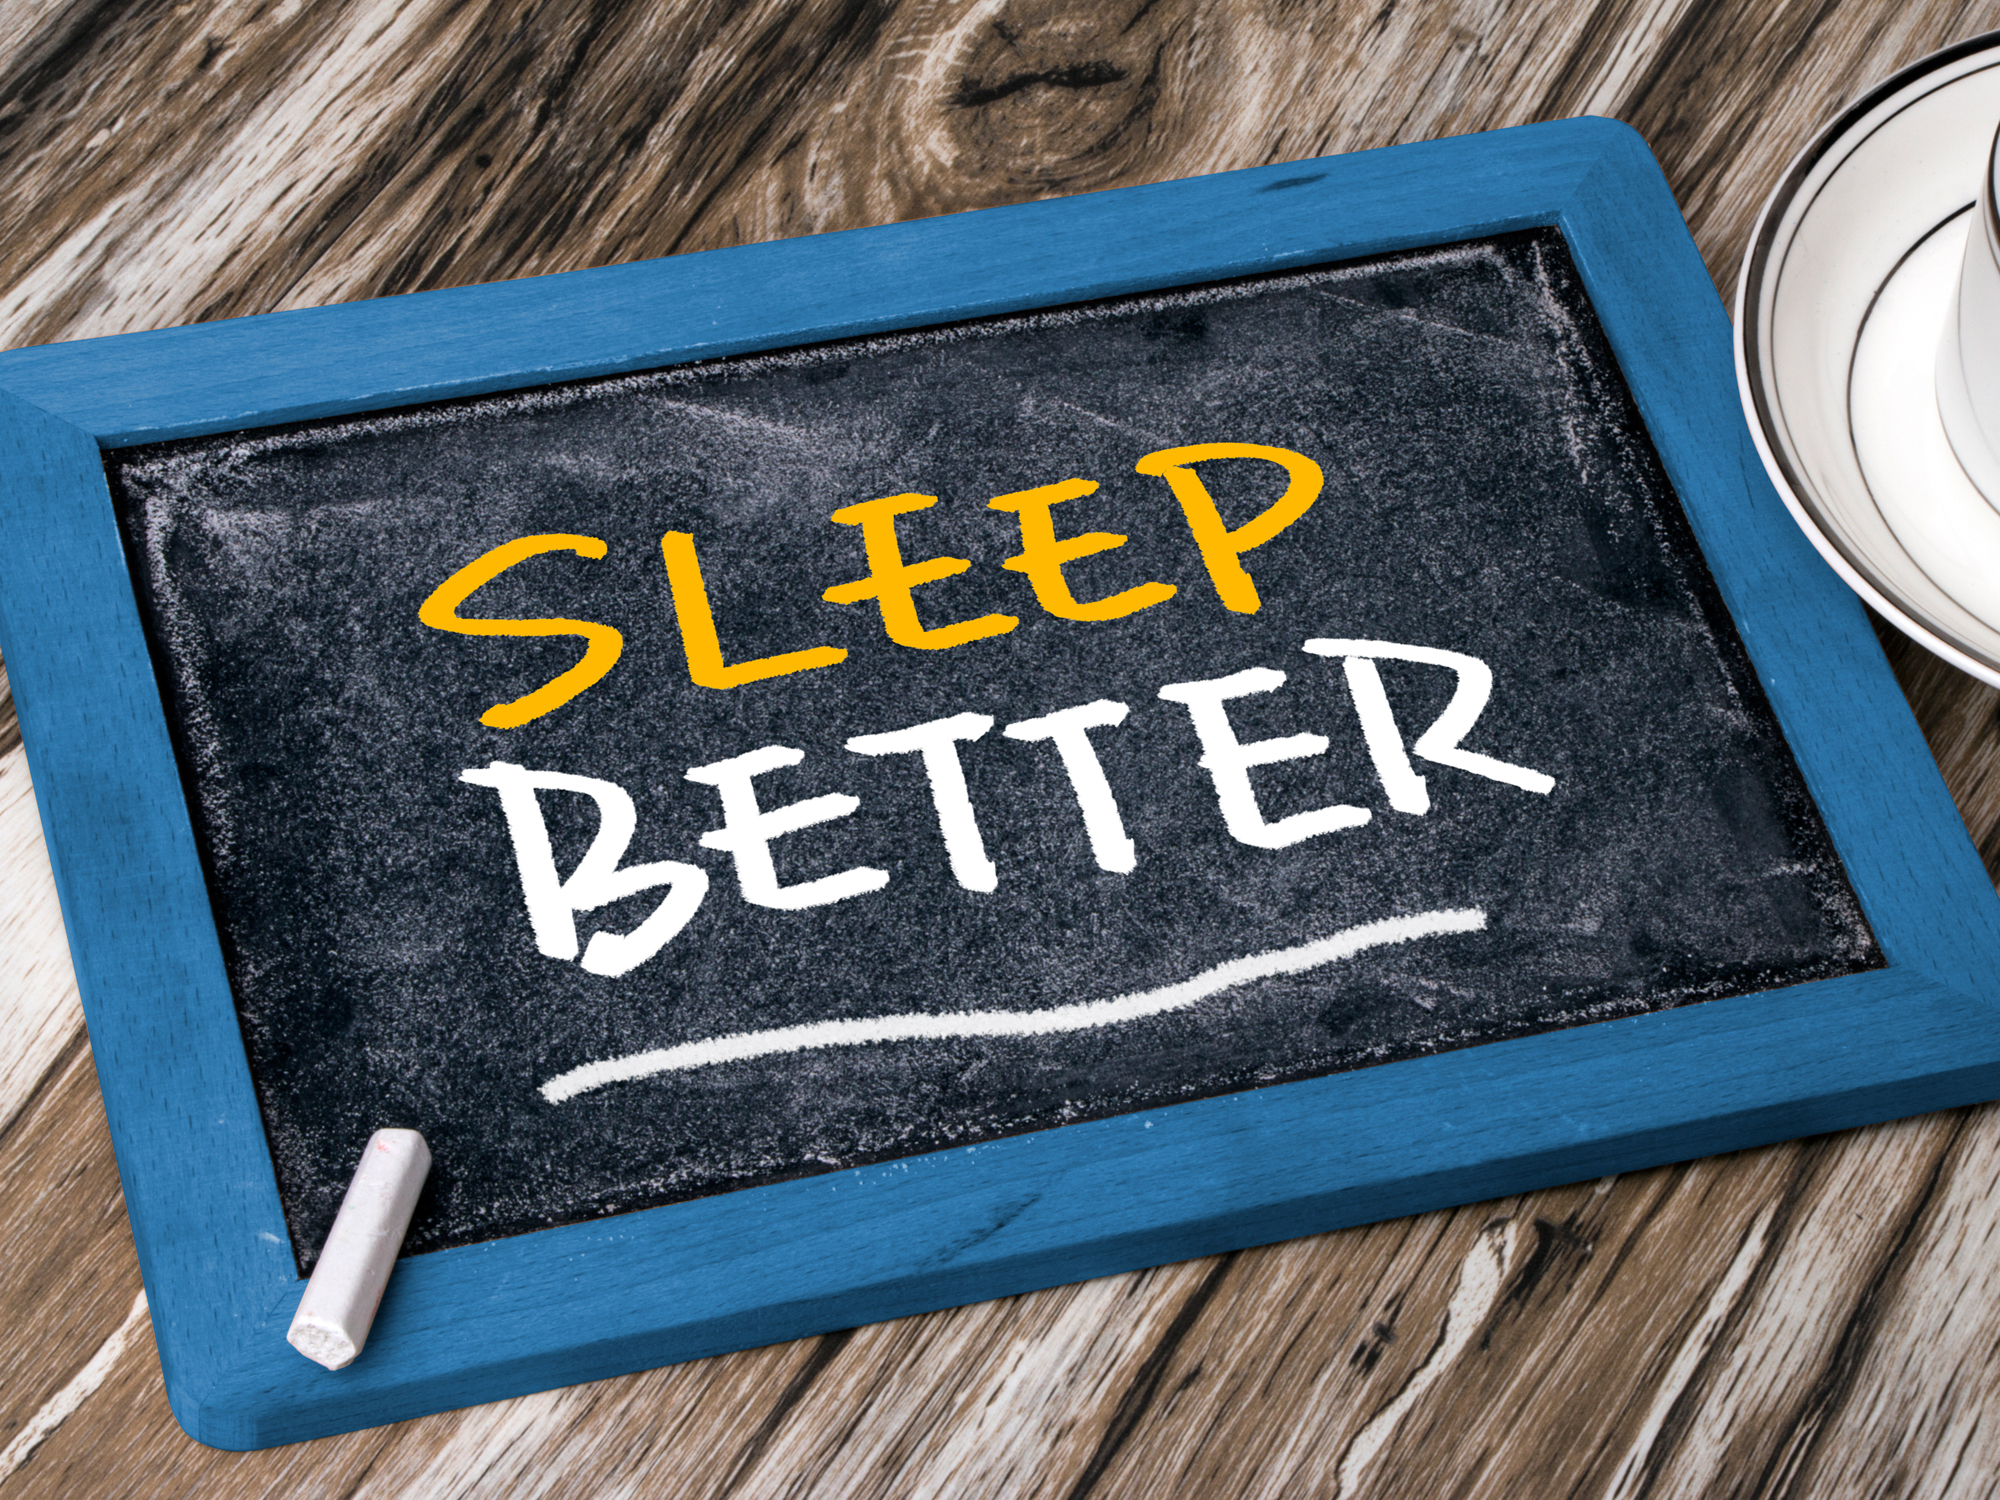 One simple daily deed to sleep better